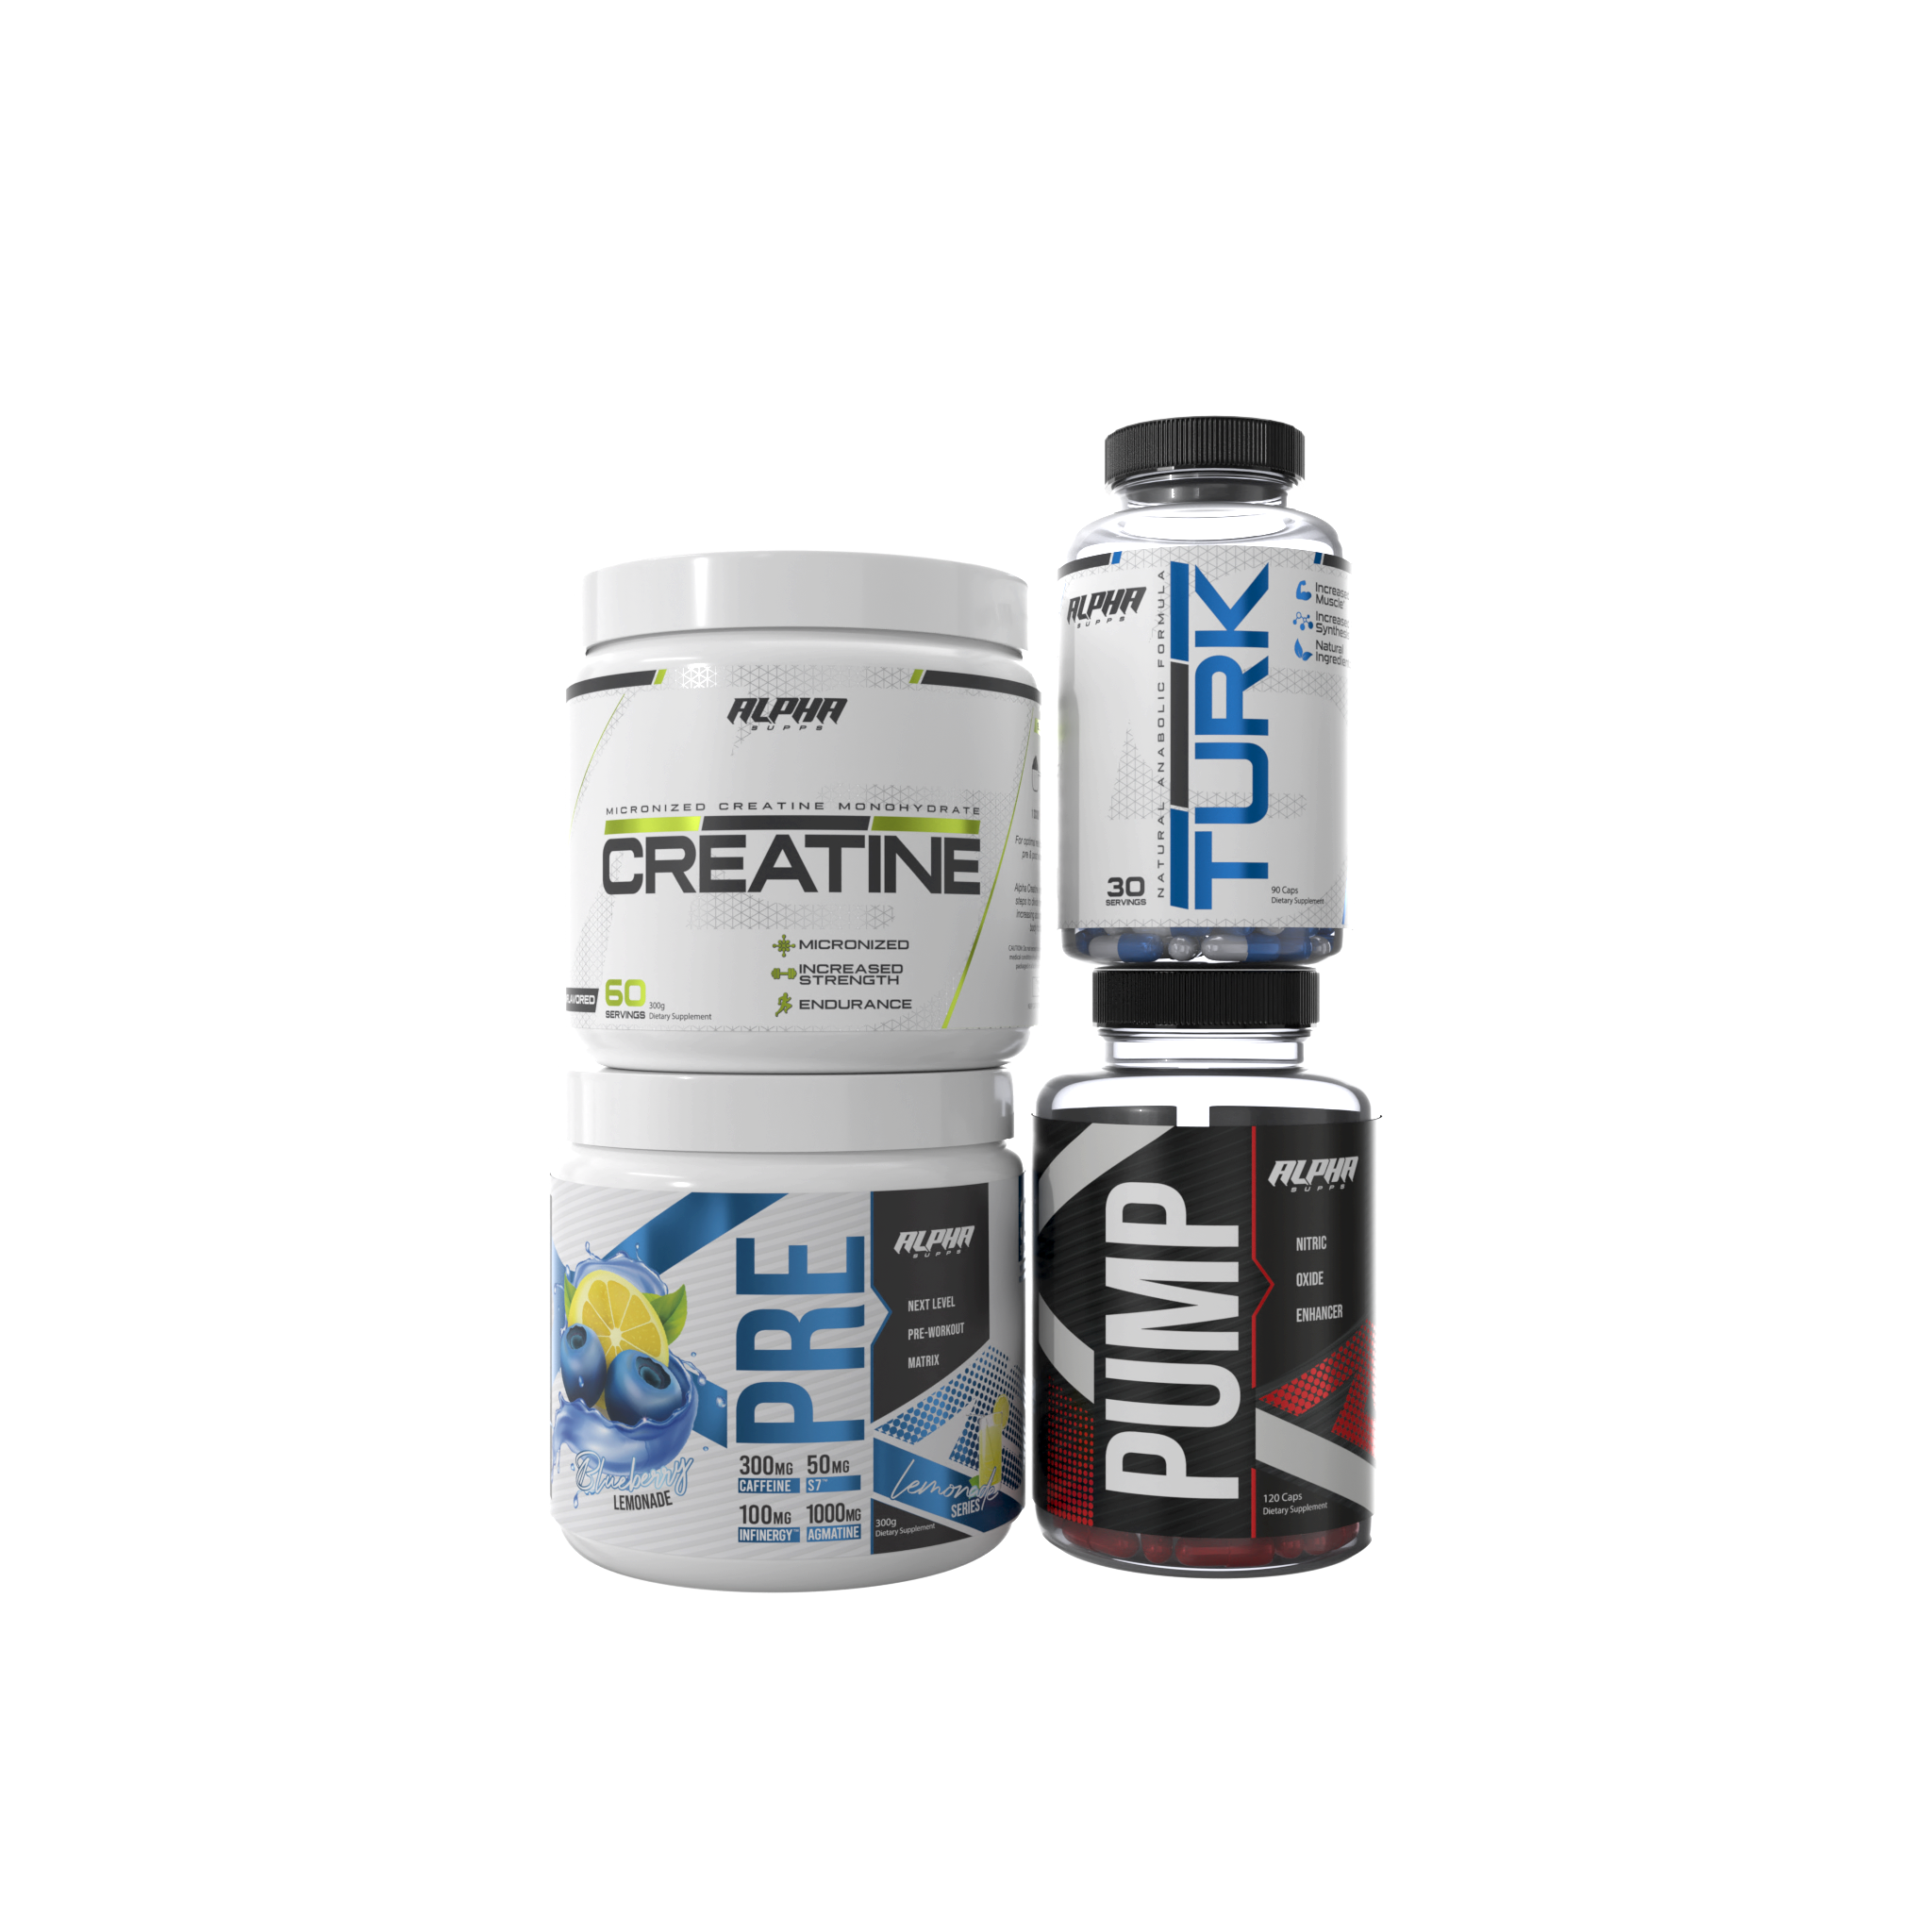 Performance stack supplements